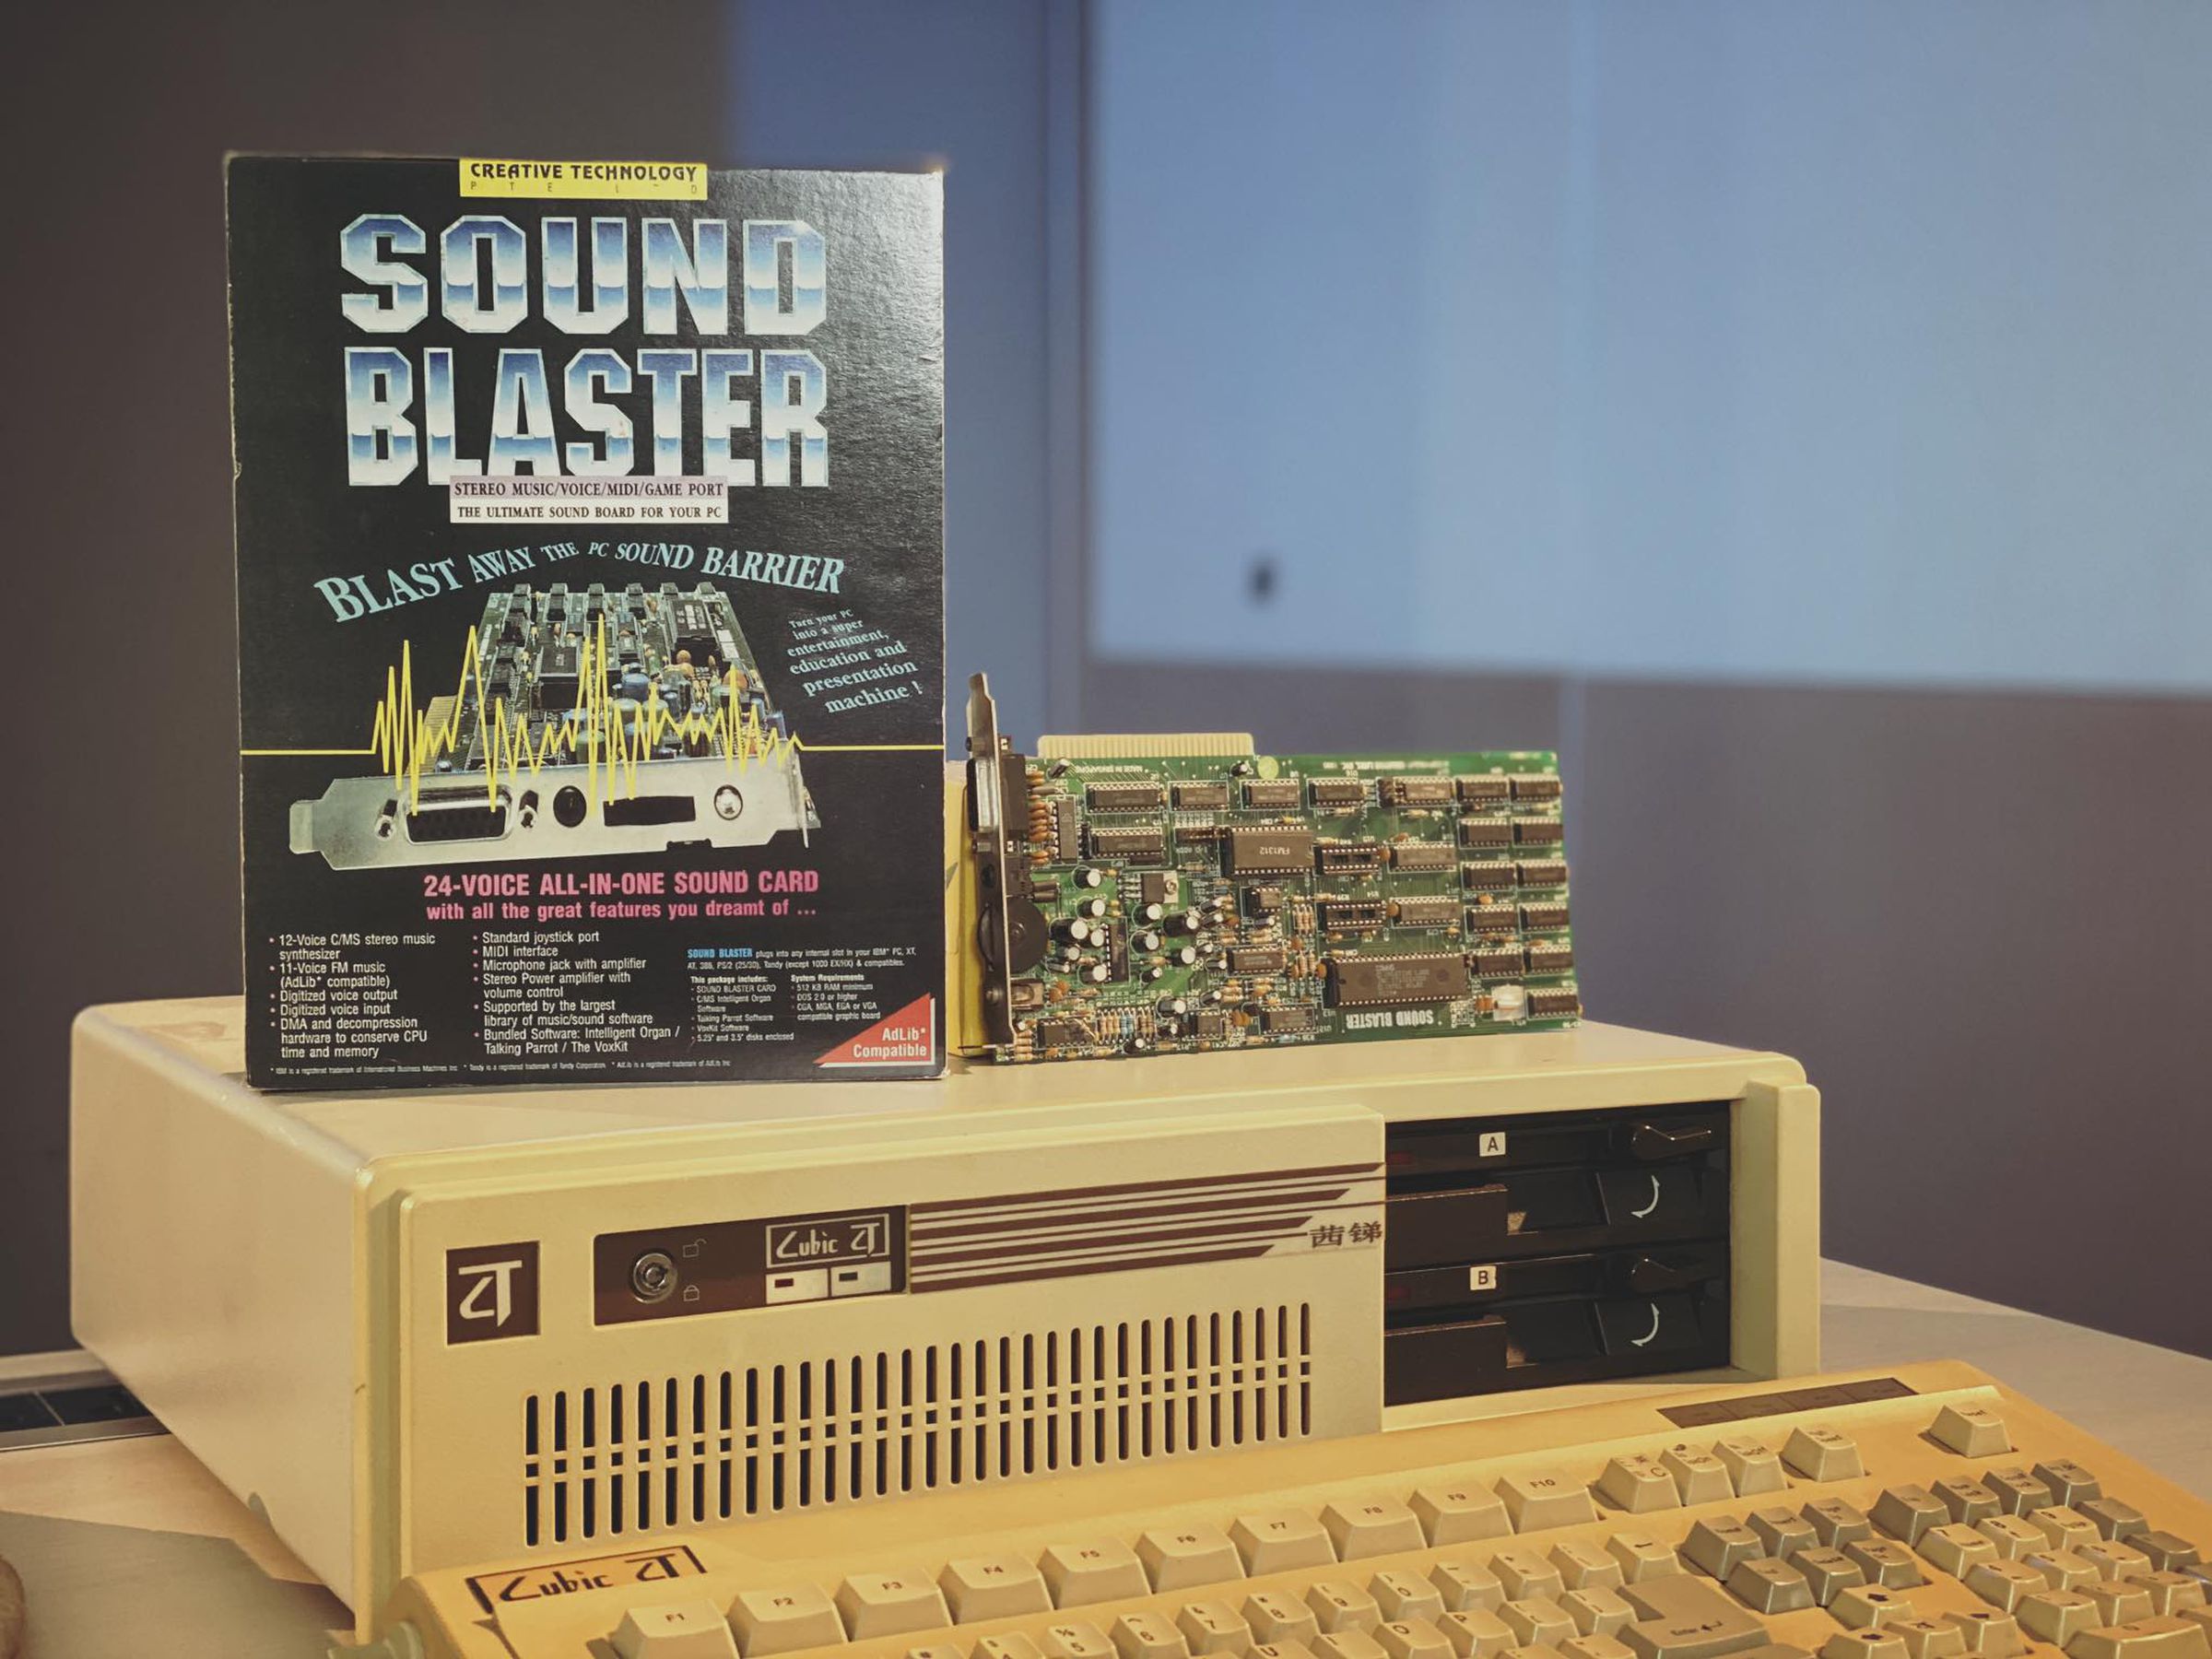 Cubic CT next to the original Sound Blaster.  In fact, it was the company's second personal computer after the Cubic99 launched in 1984, which was known as 